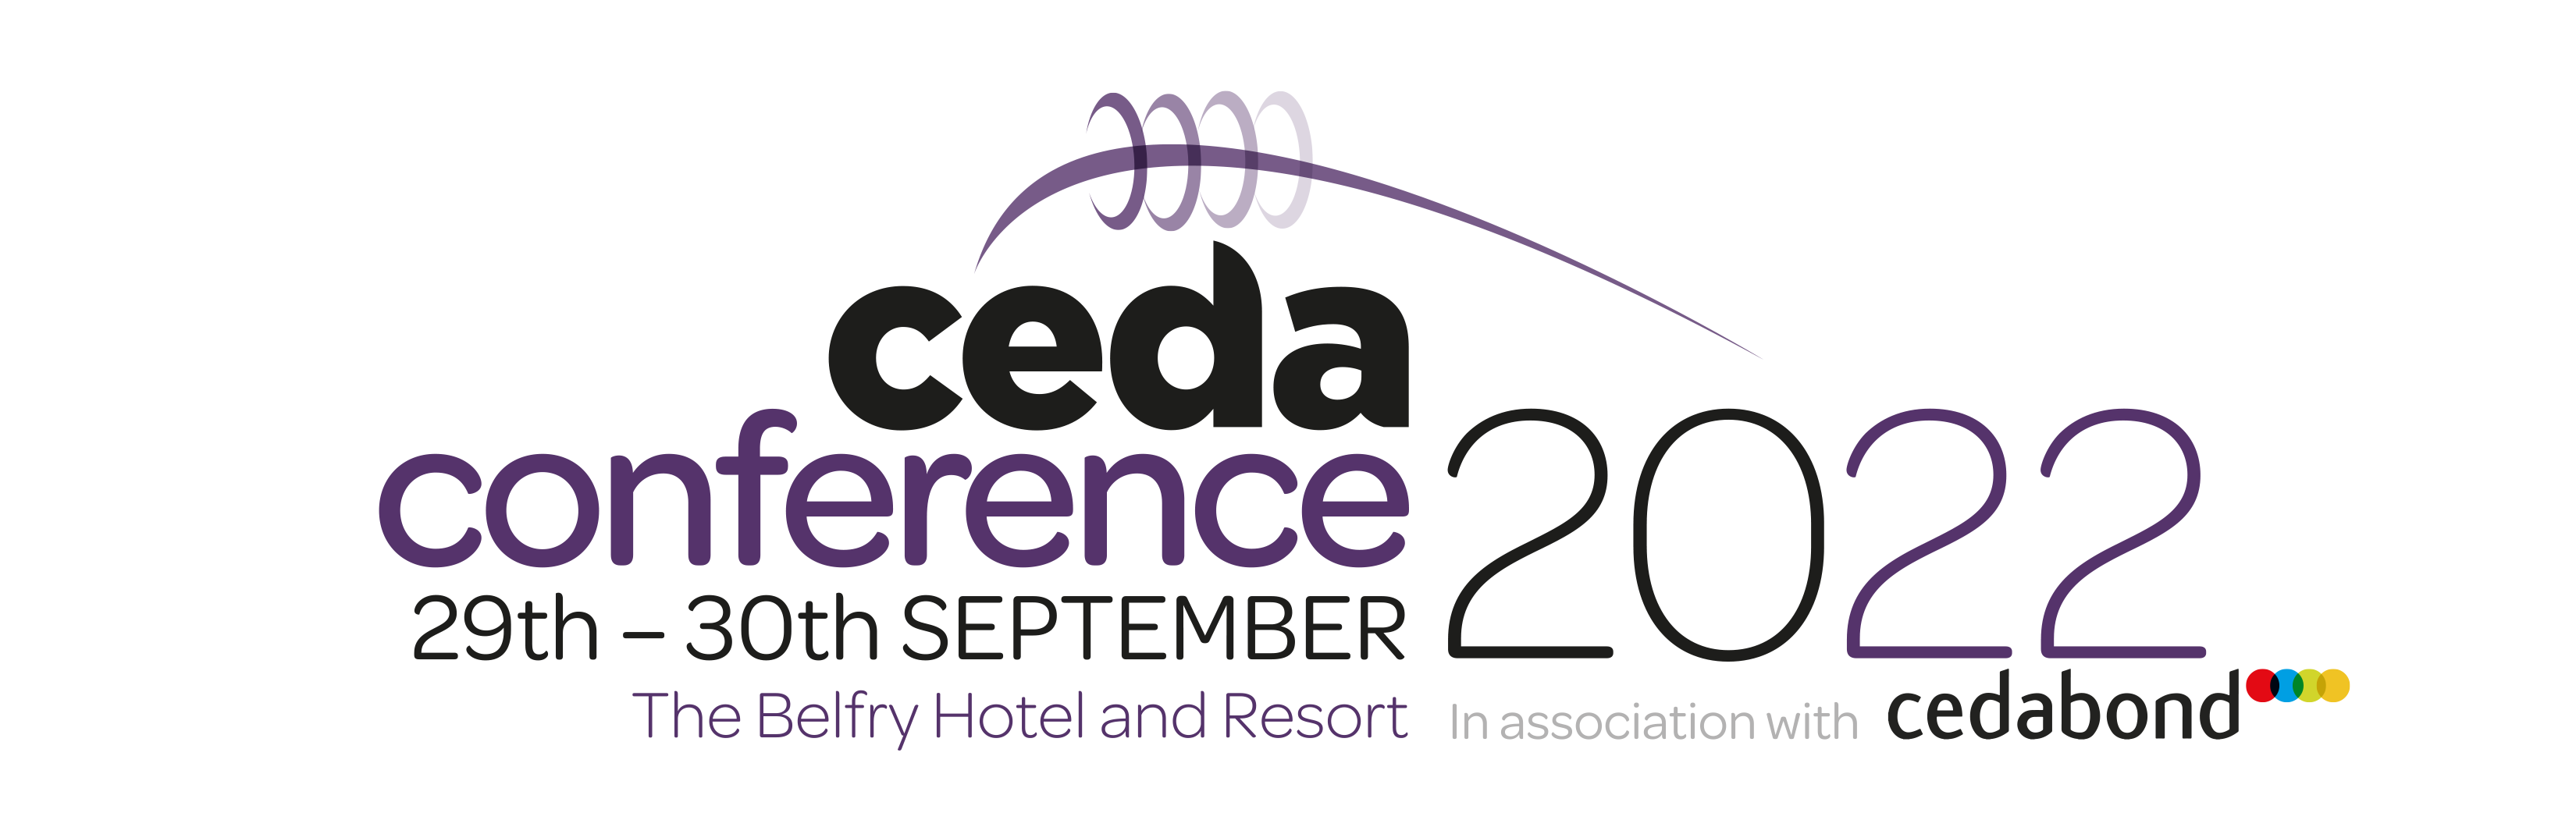 ceda conf 2022_with dates